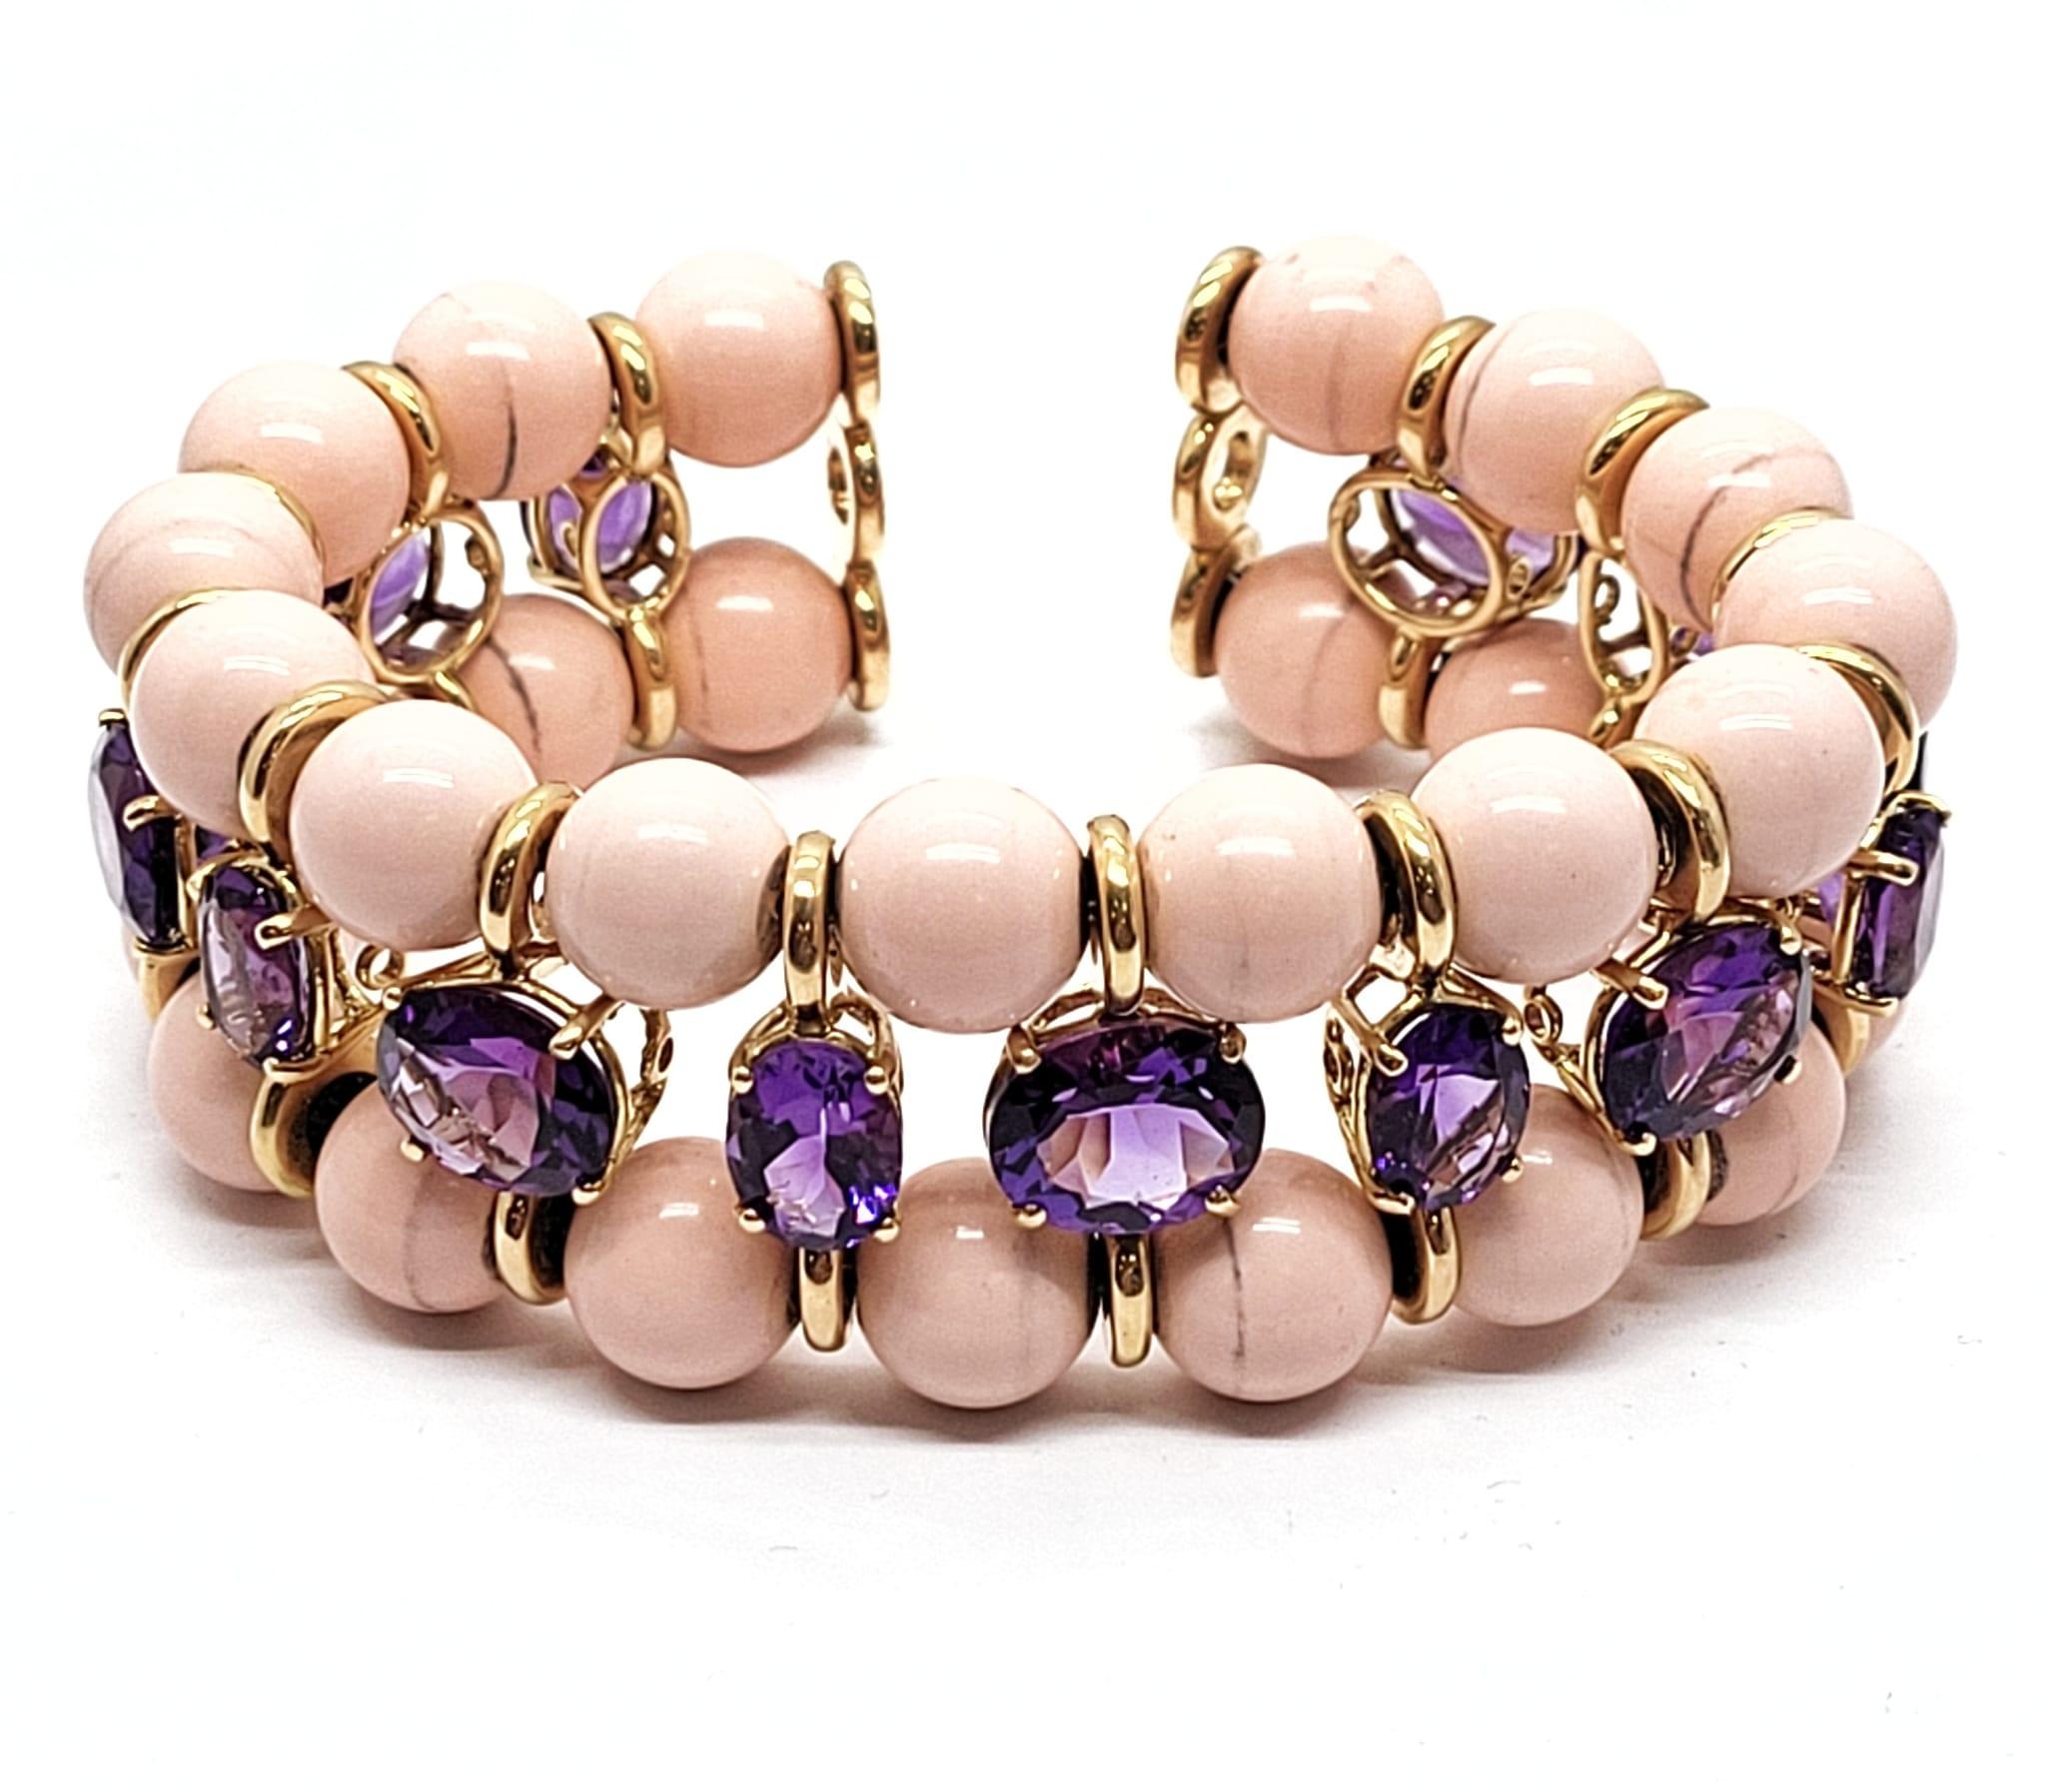 Contemporary Andreoli 32.93 Carat Amethyst Coral 18 Karat Yellow Gold Bracelet For Sale